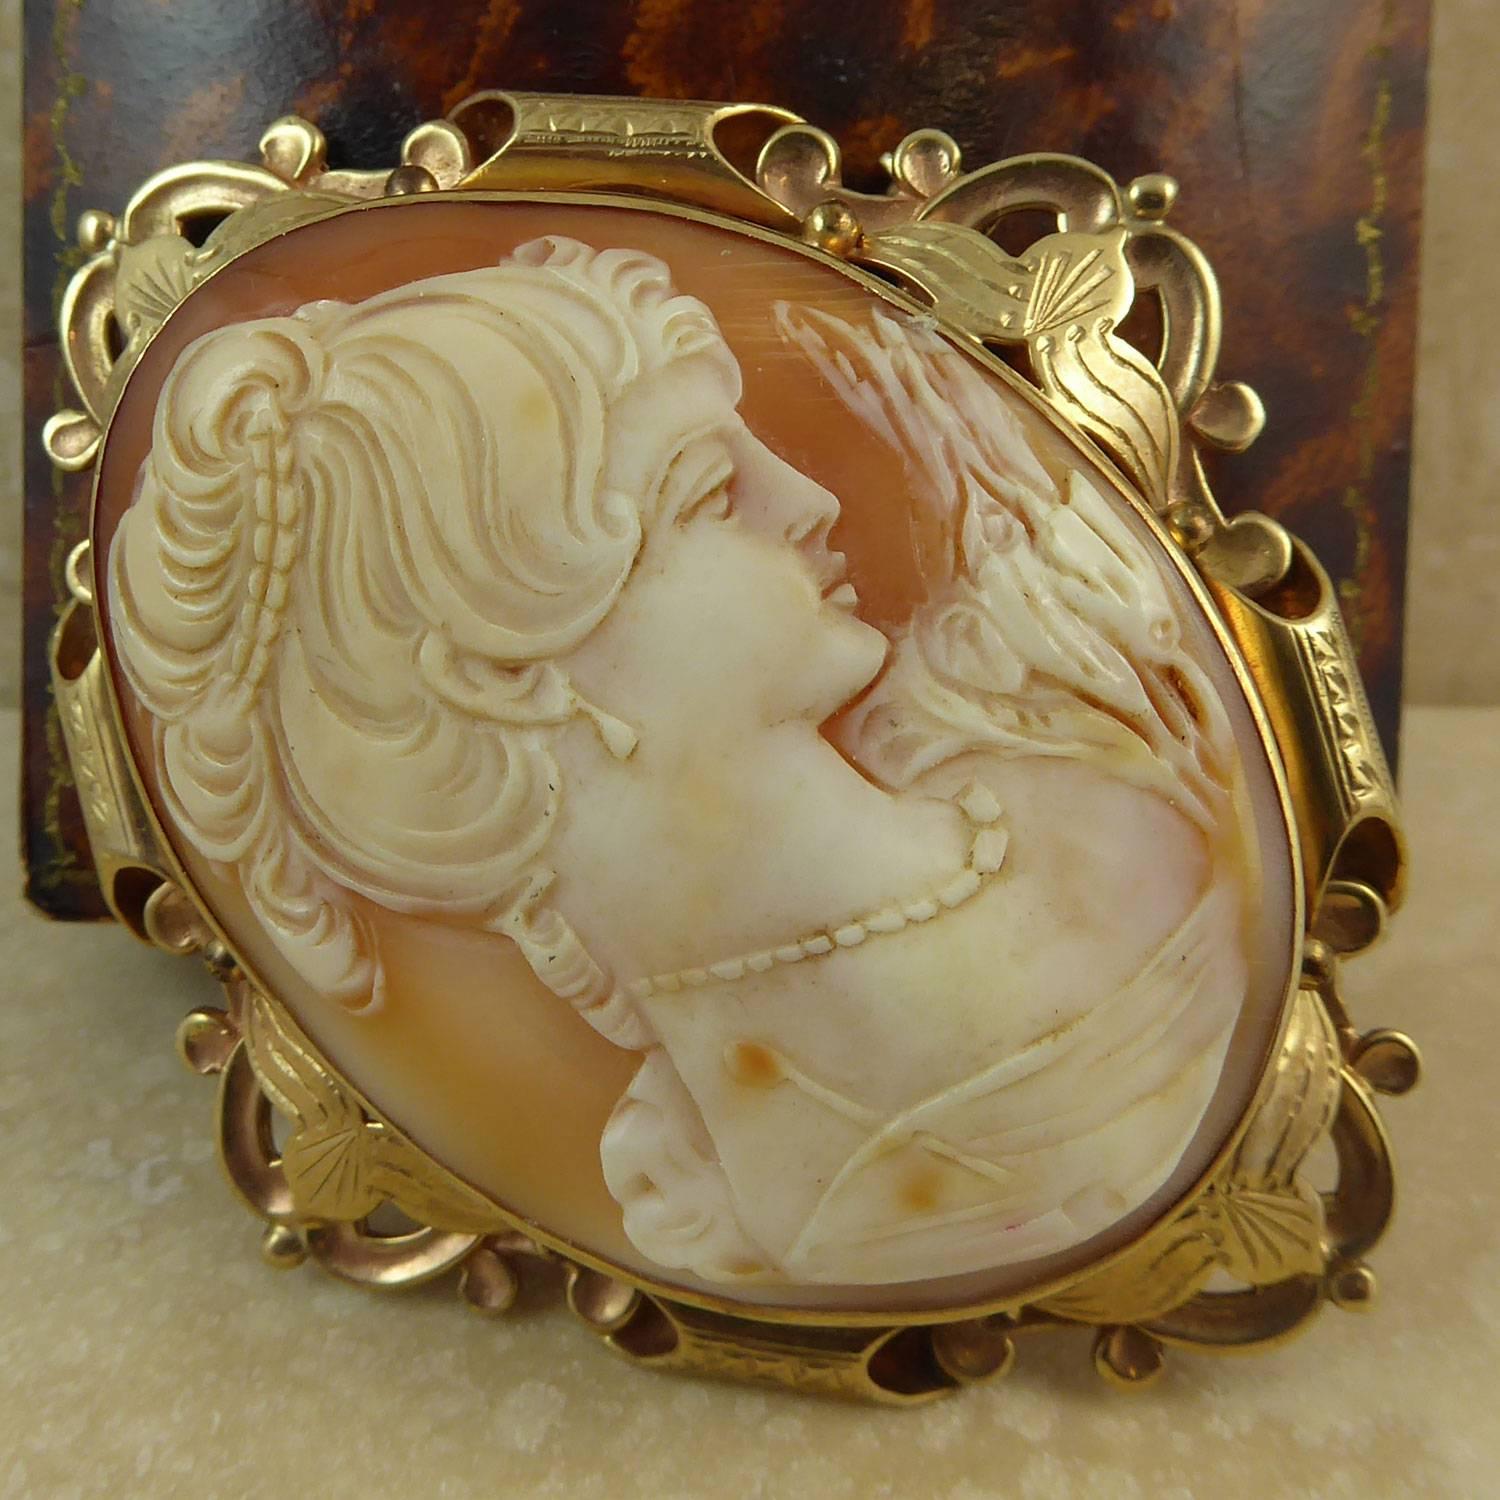 Vintage Carved Shell Cameo Brooch, Ornate Gold Surround, Hallmarked, 1965 1